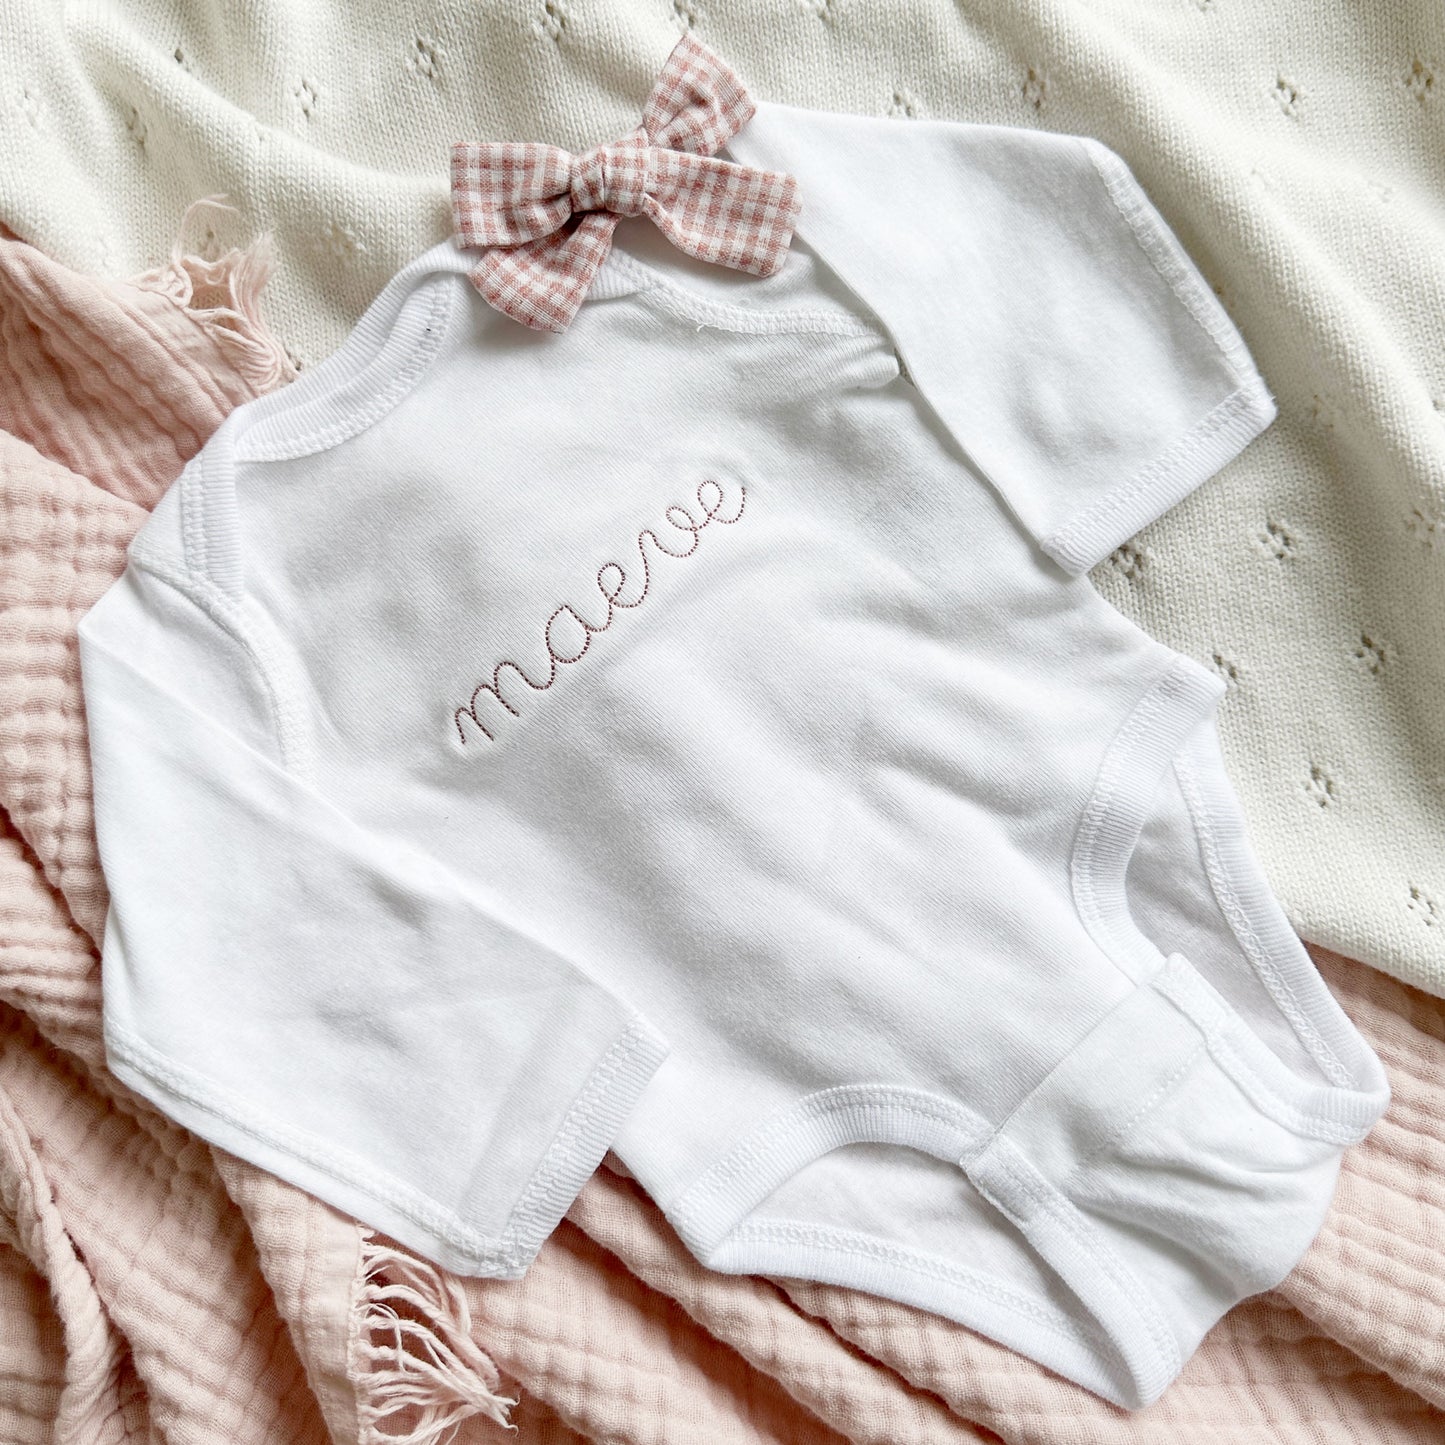 baby bodysuit with a name stitched across the chest in a dark pink thread